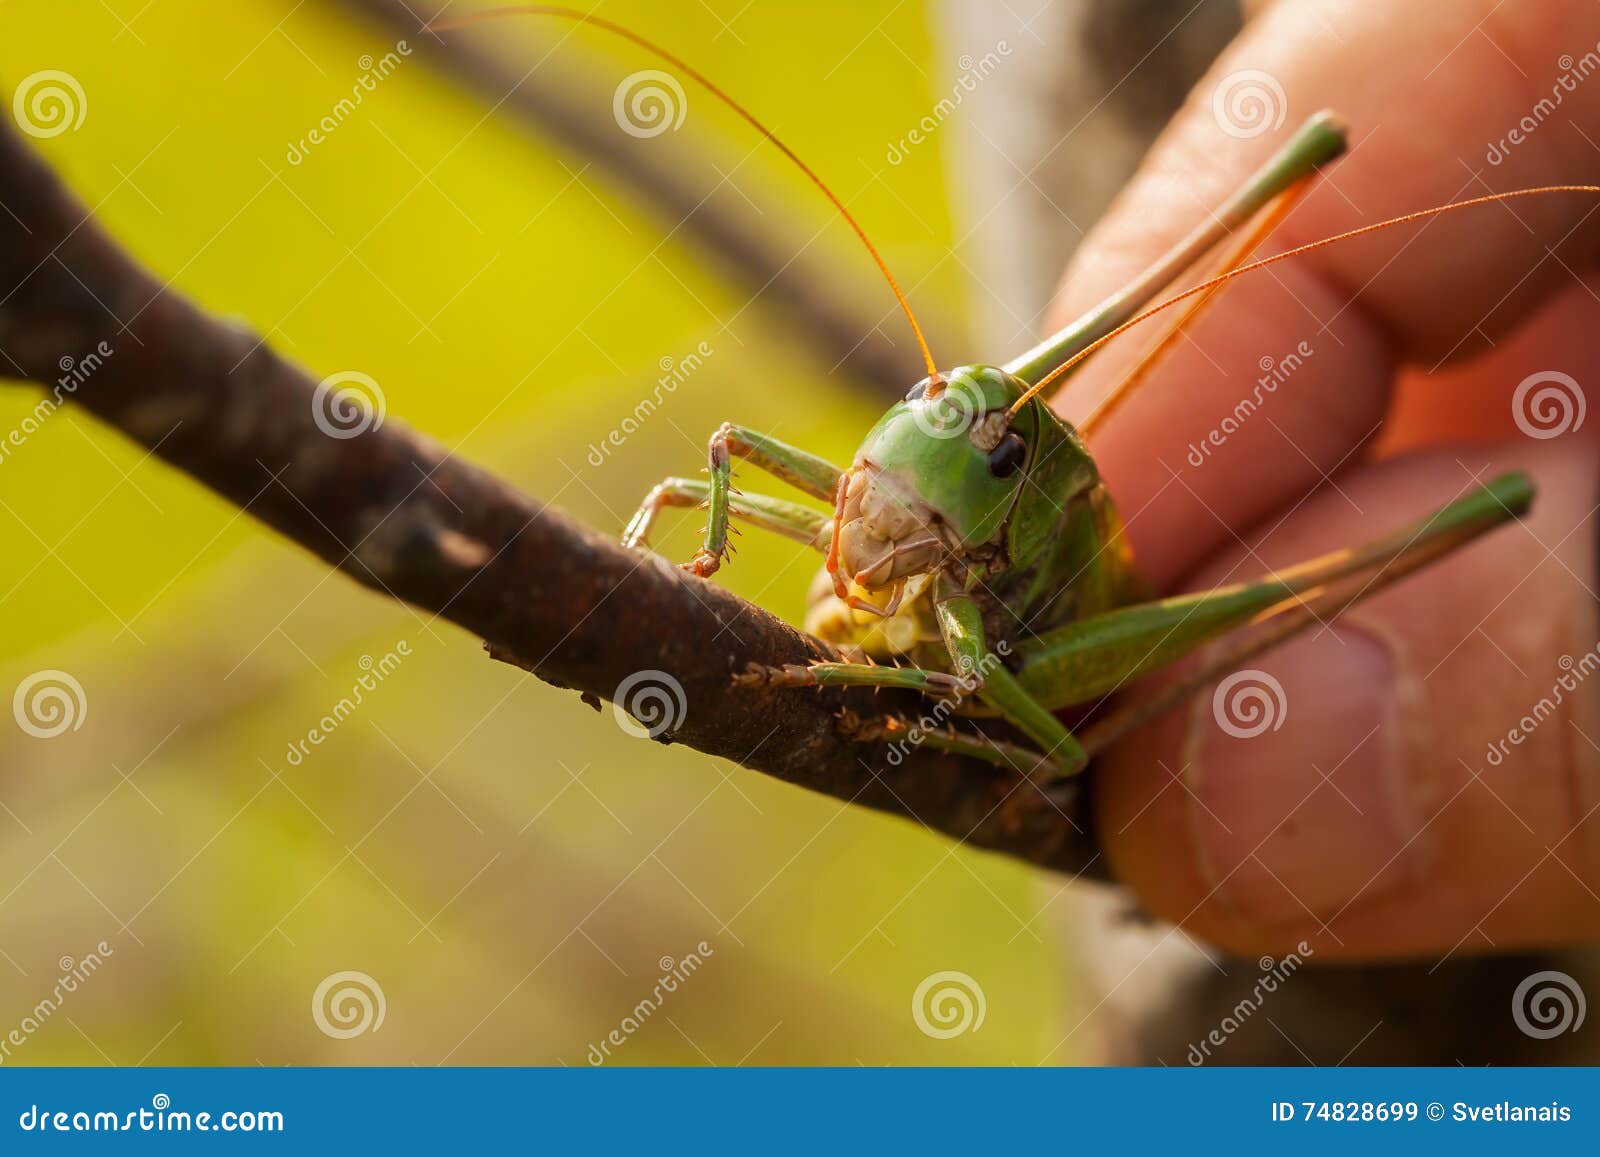 https://thumbs.dreamstime.com/z/hand-man-touched-grasshopper-allowed-to-touch-his-body-spread-bait-catching-different-fish-float-rod-fly-fishing-74828699.jpg